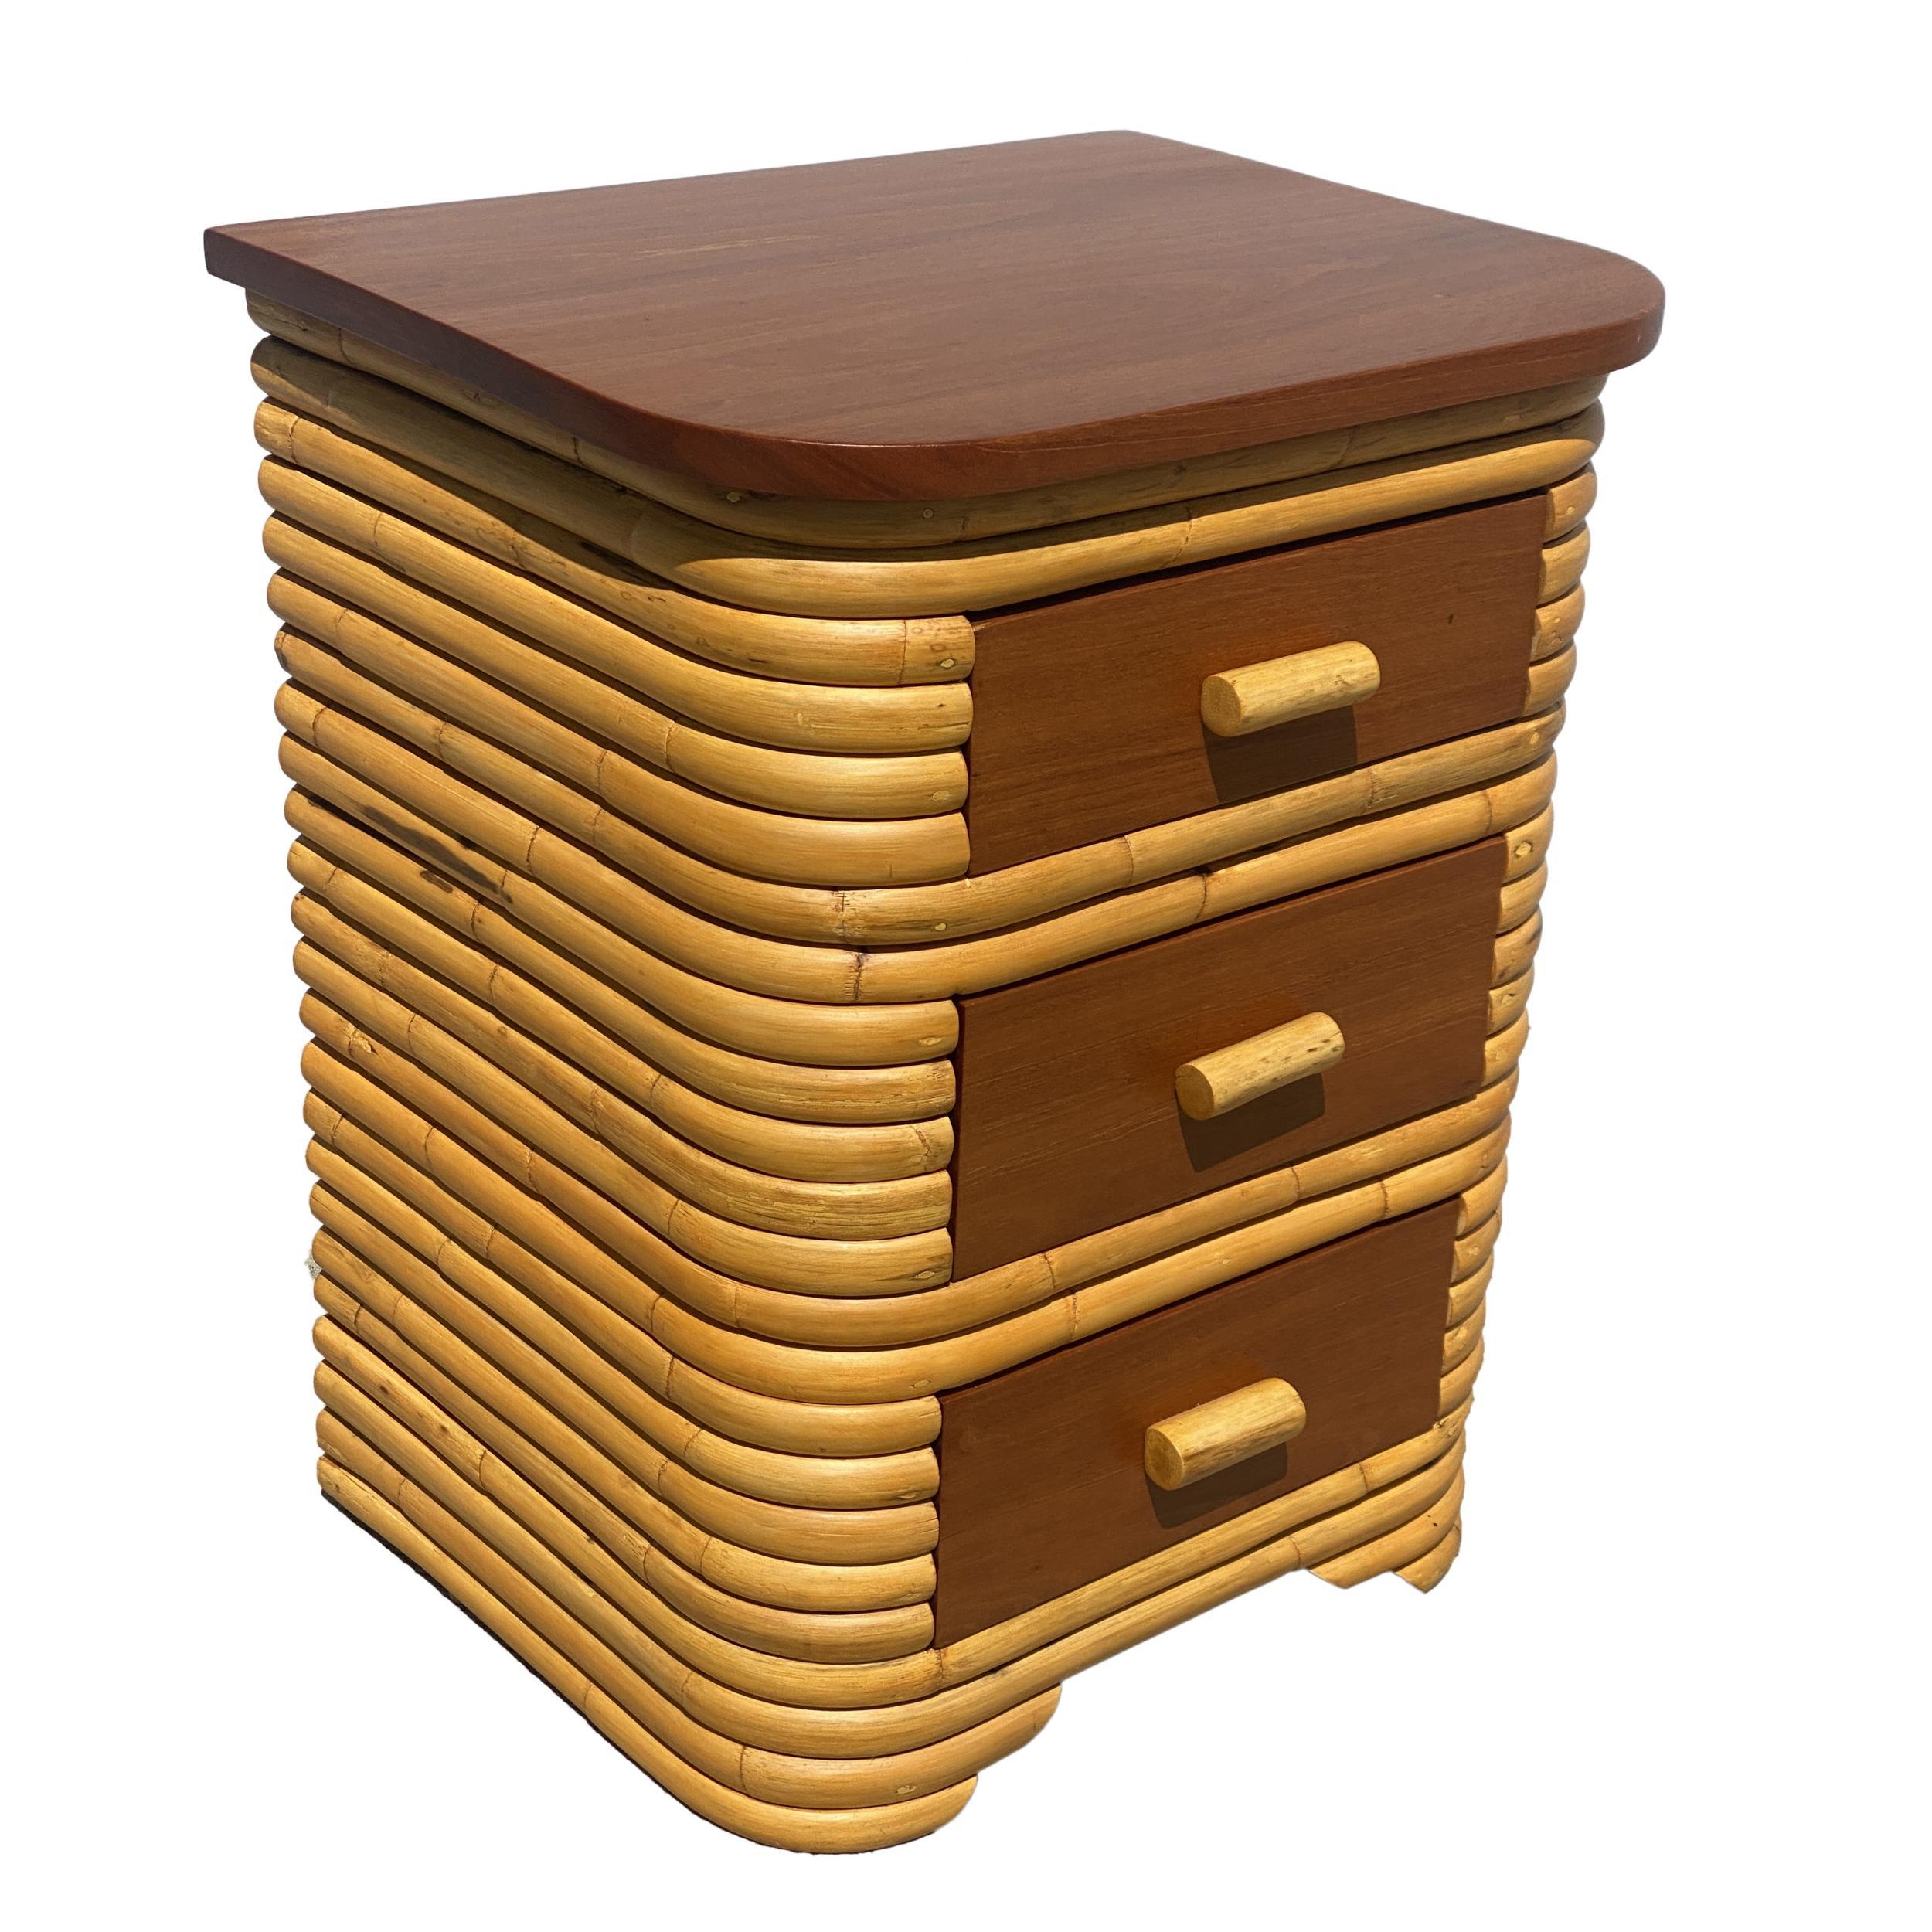 Pair of vintage Art Deco stacked rattan bedside table with mahogany top with 3 drawers. 

Restored to new for you. 

All rattan, bamboo and wicker furniture has been painstakingly refurbished to the highest standards with the best materials. All